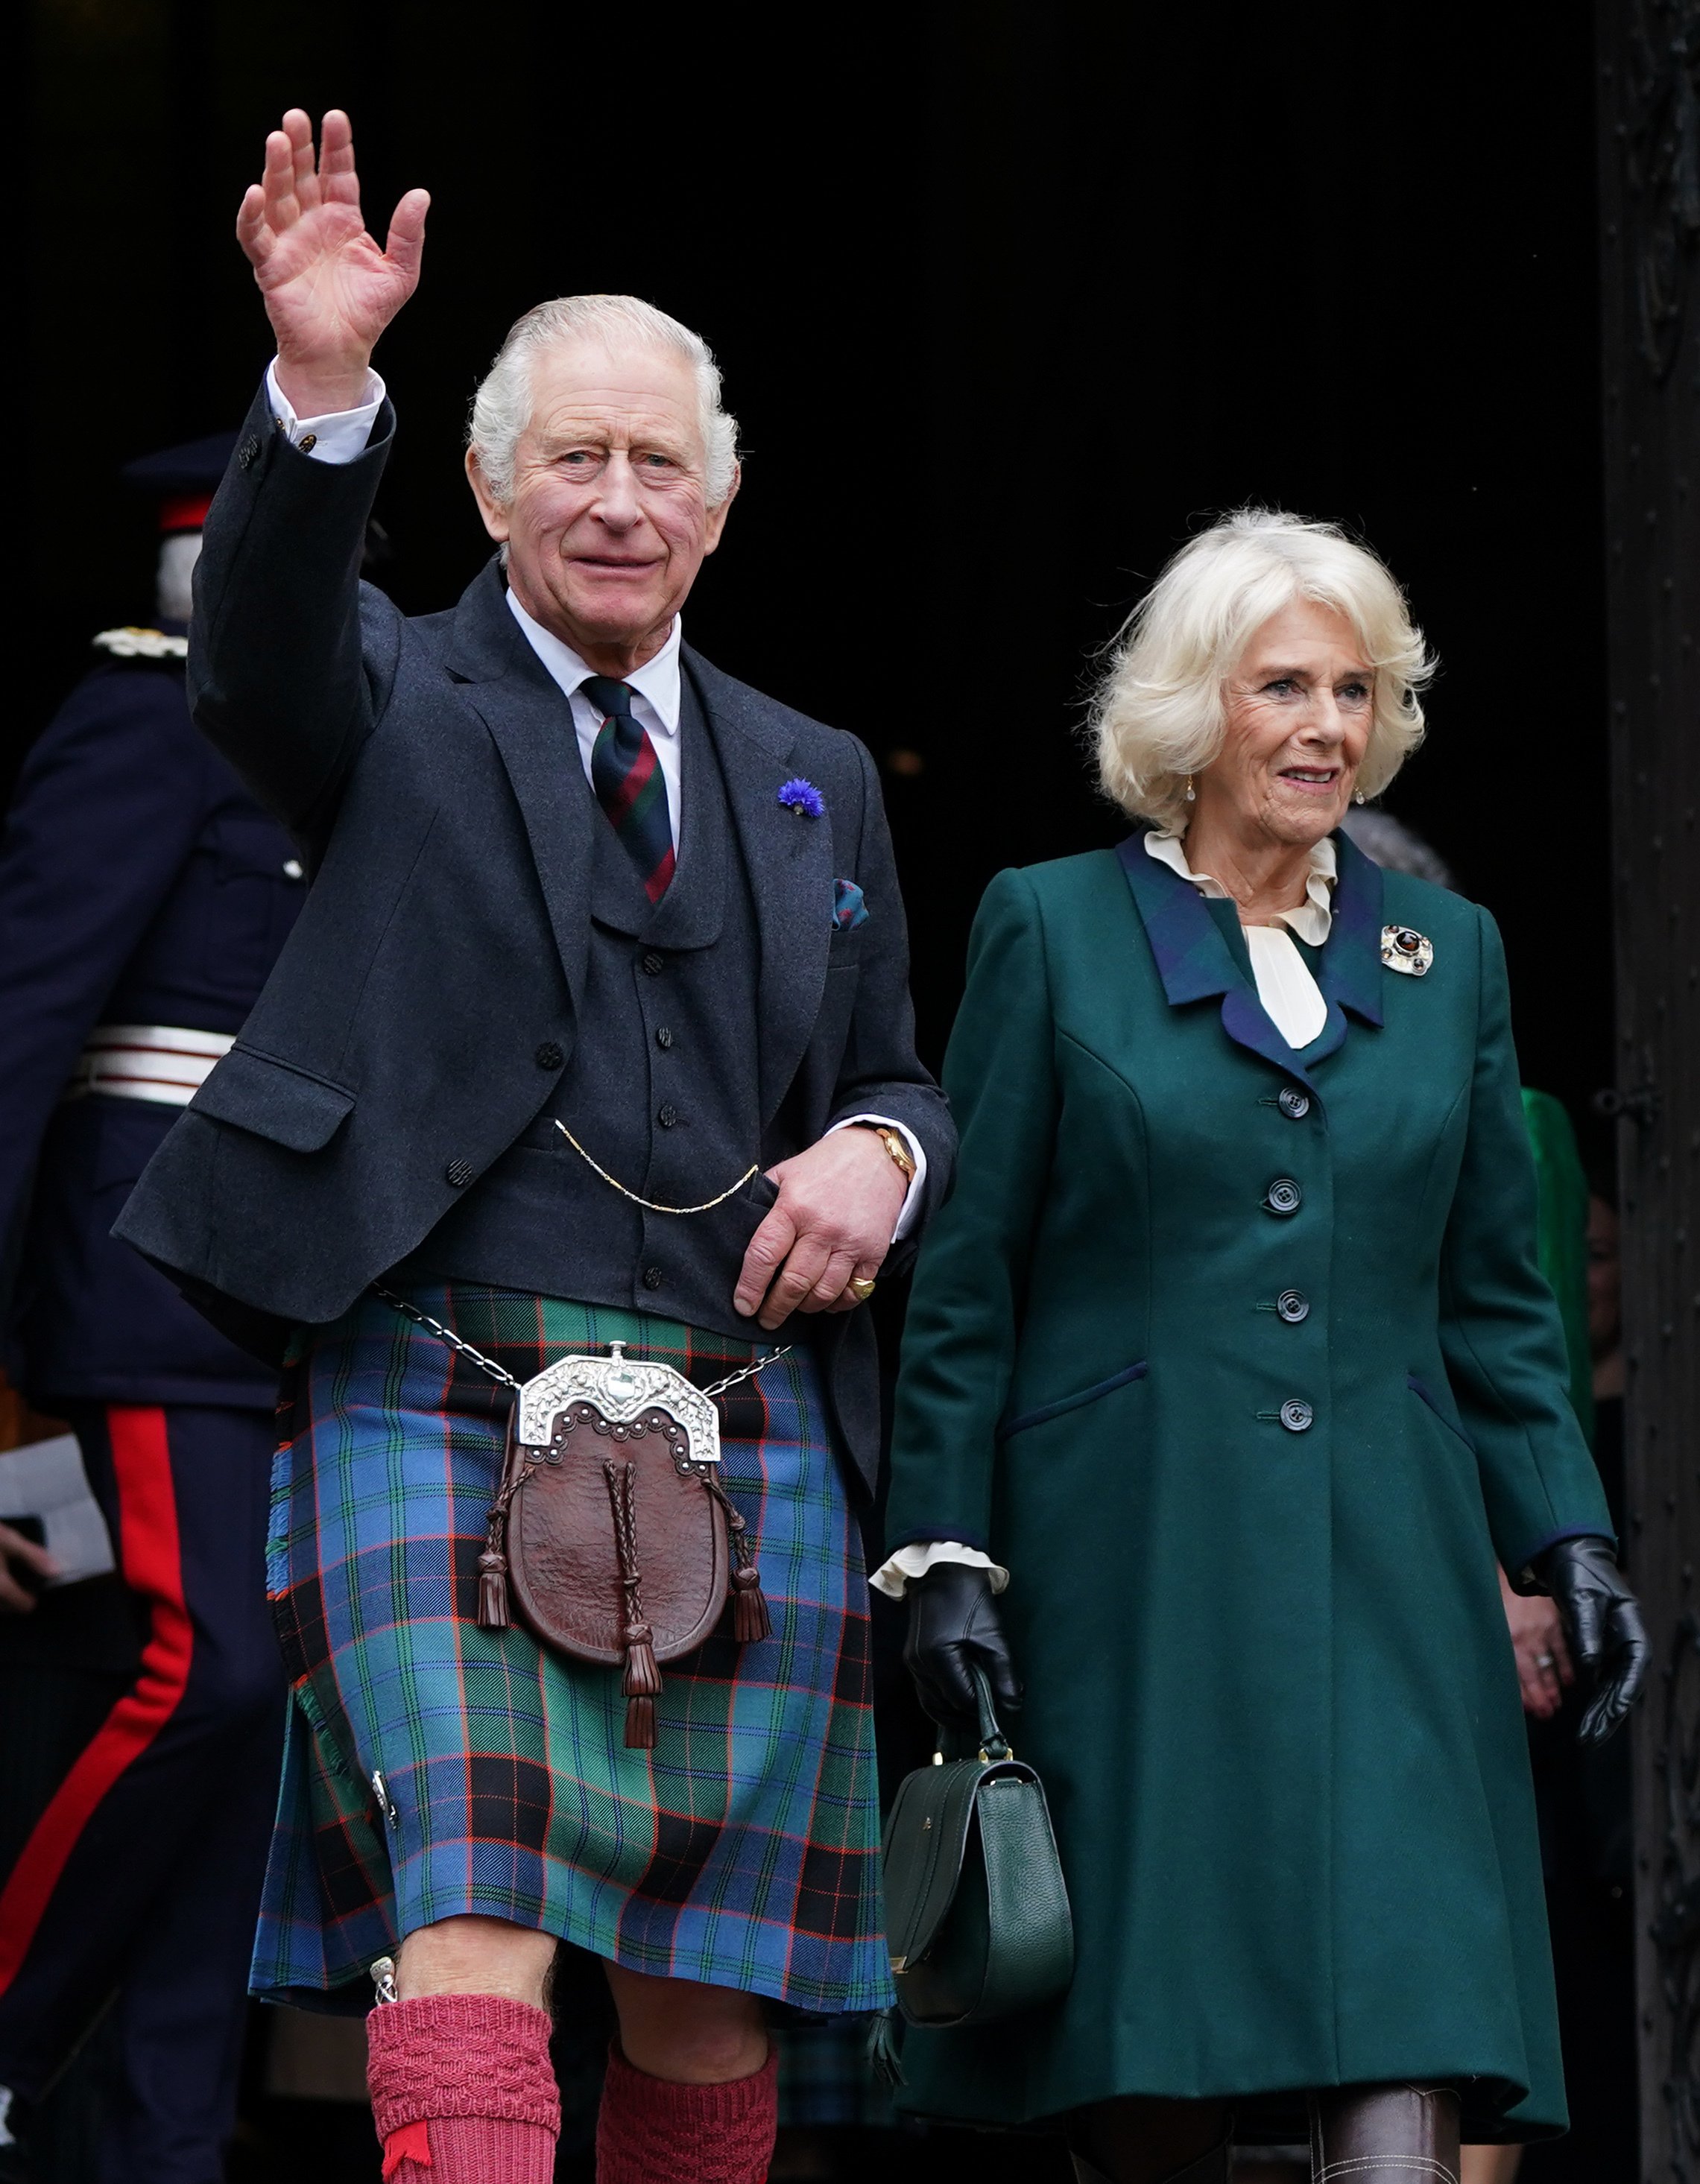 King Charles III and Camilla, Queen Consort on October 3, 2022 in Dunfermline, Scotland. | Source: Getty Images